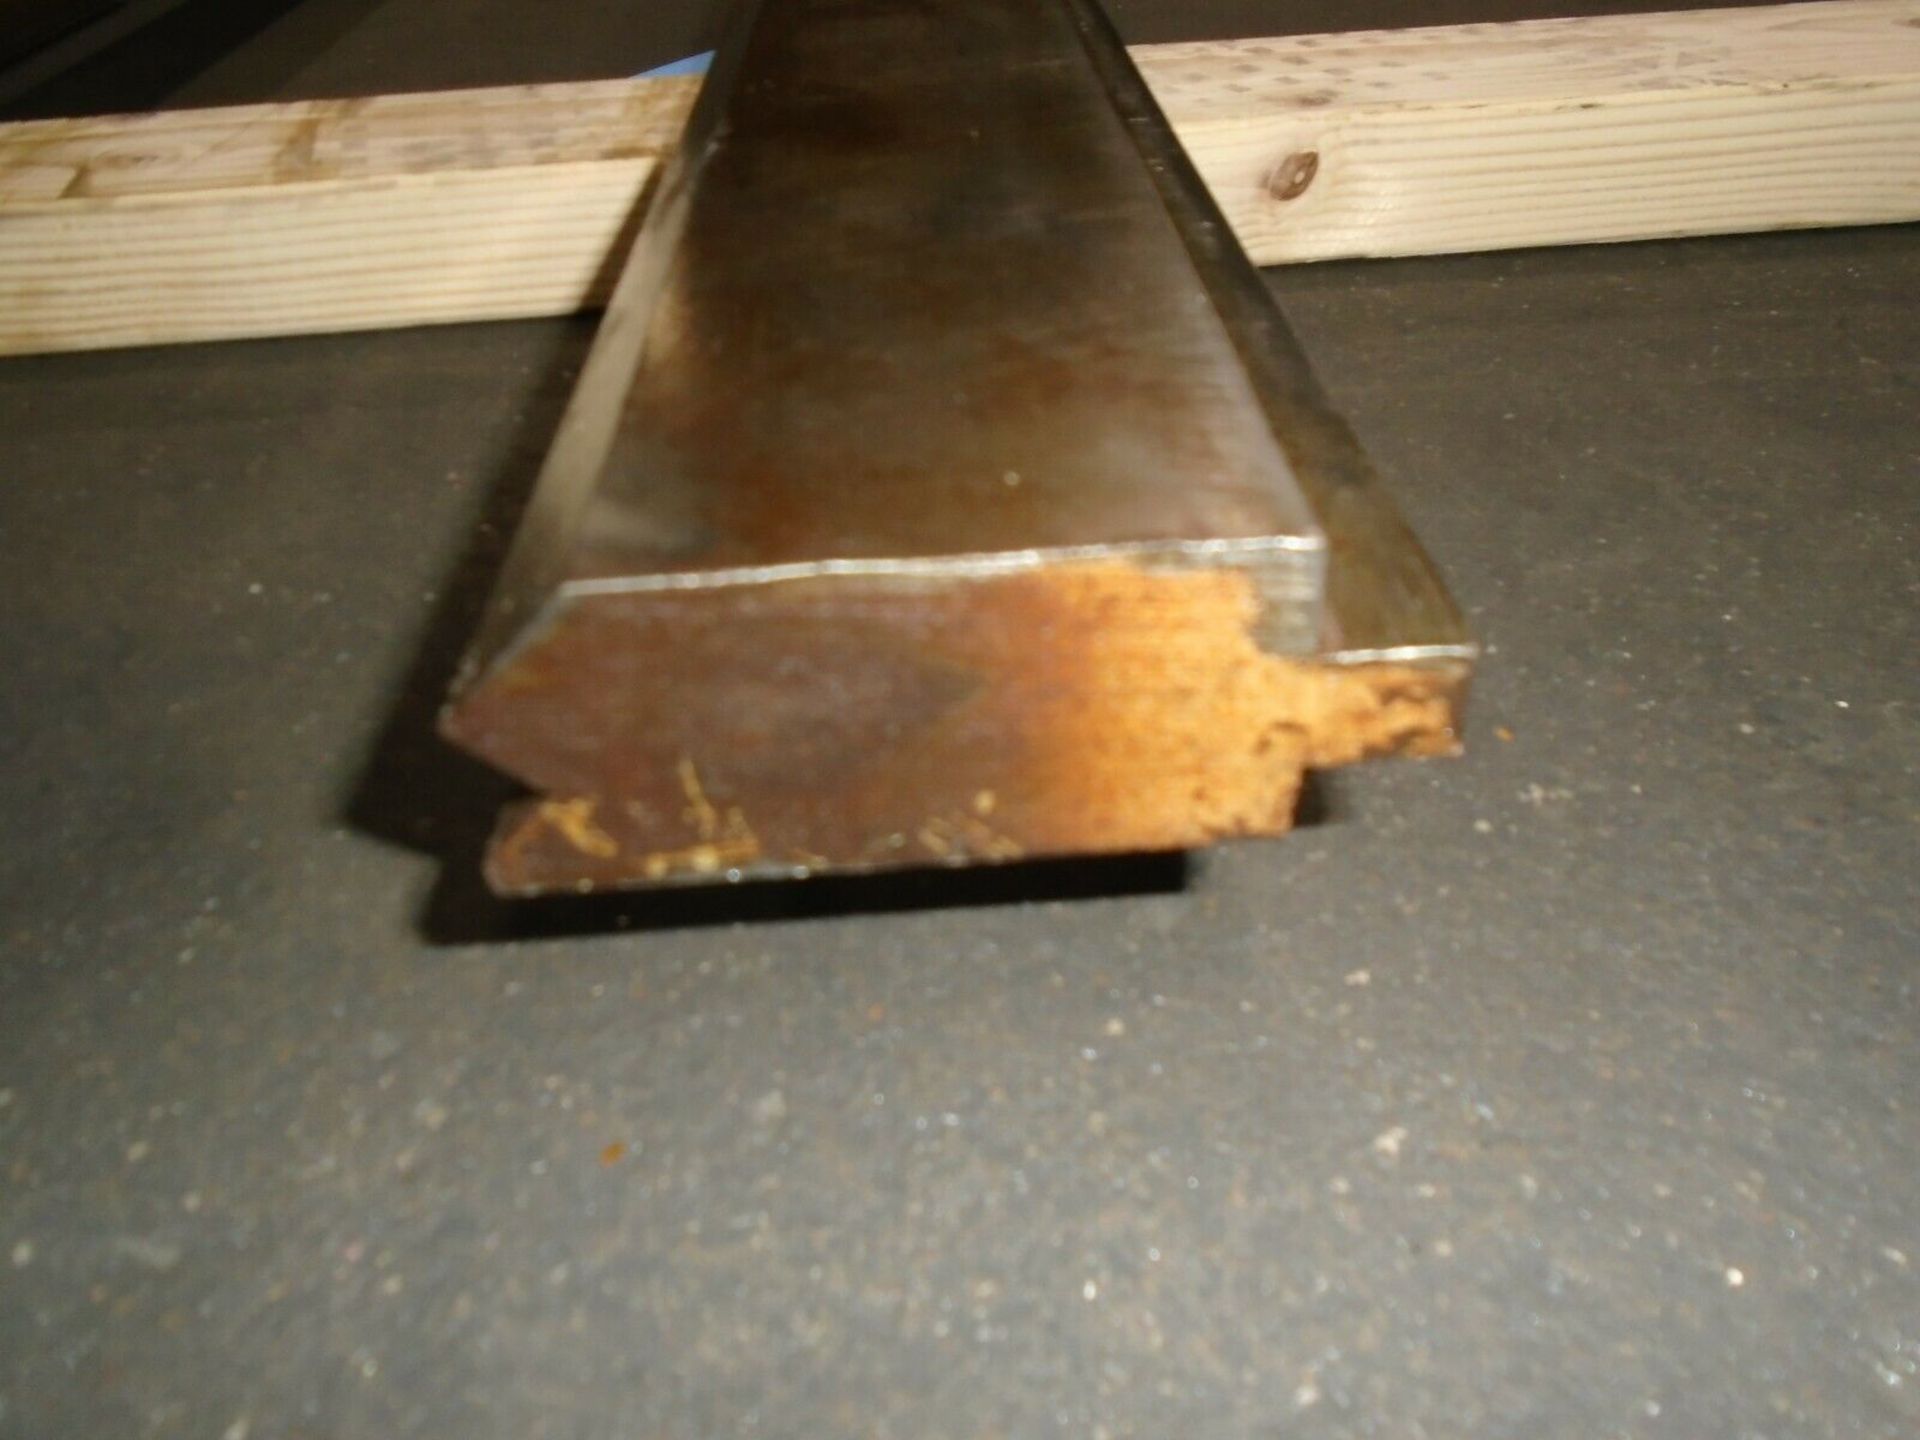 Press Brake Offset Forming Die 1 Die Only See Pictures For Dimensions - Image 2 of 4